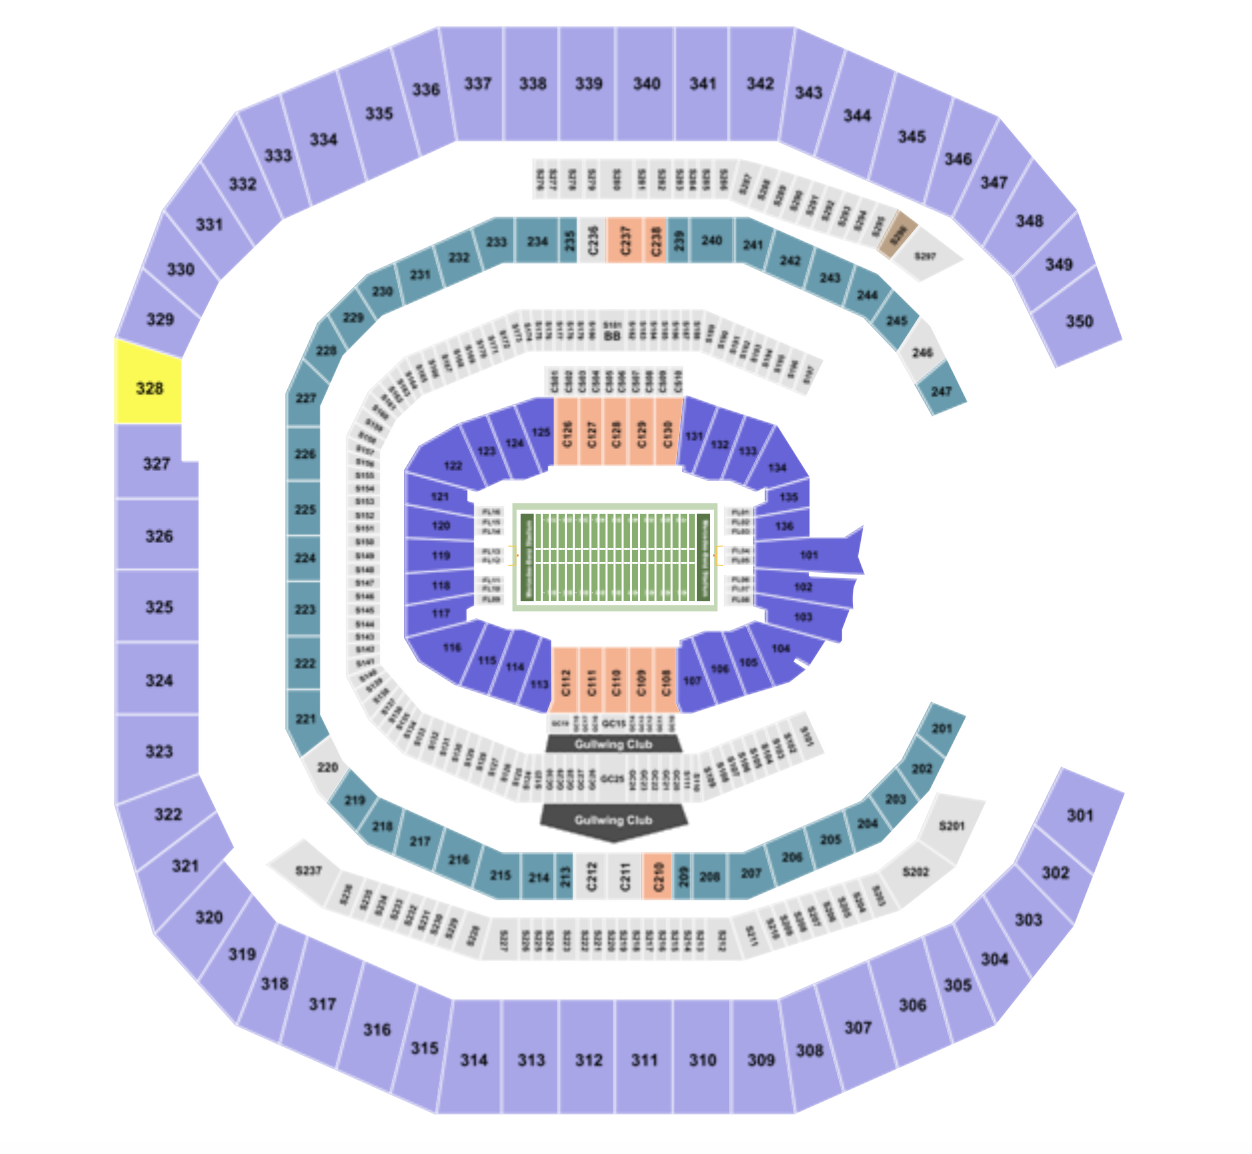 Mercedes Benz Superdome Seating Chart Wwe